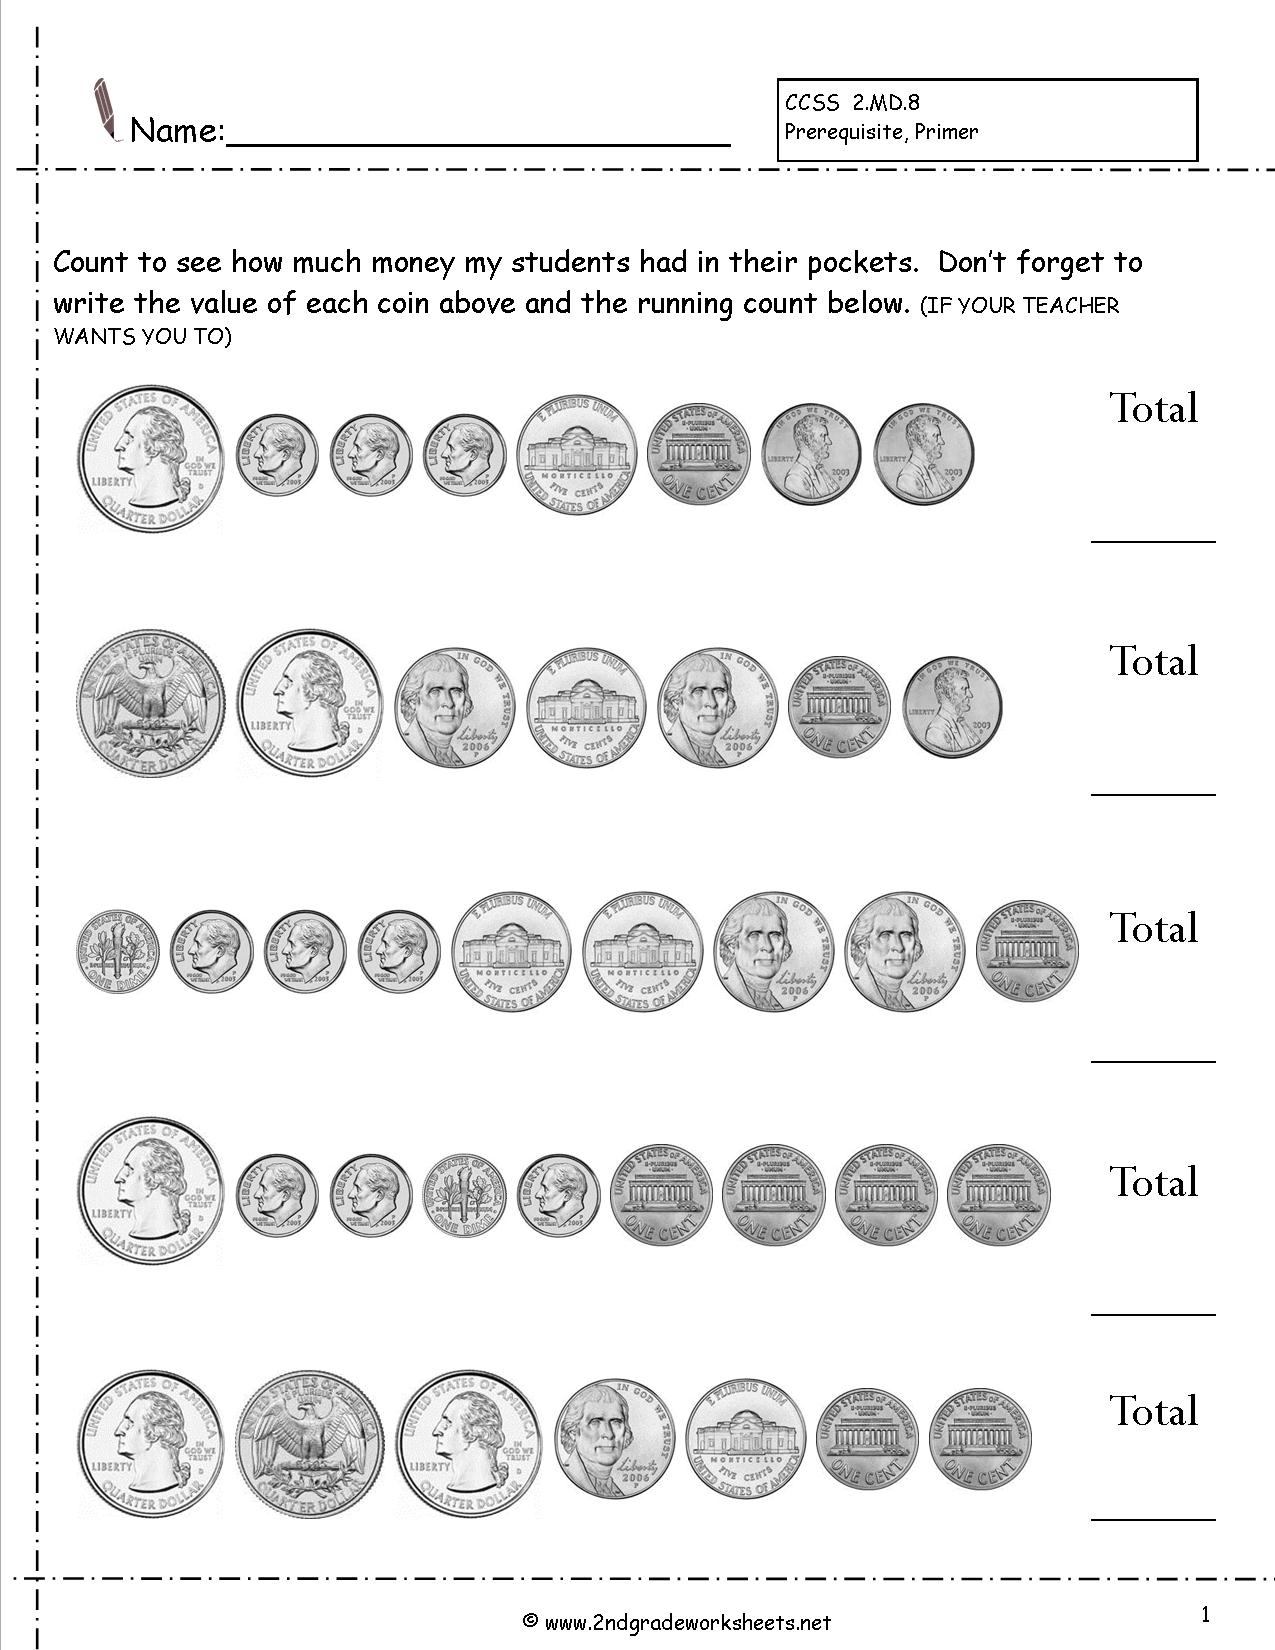 12 Best Images Of Counting Money Worksheets 4th Grade Counting Money Worksheets 2nd Grade